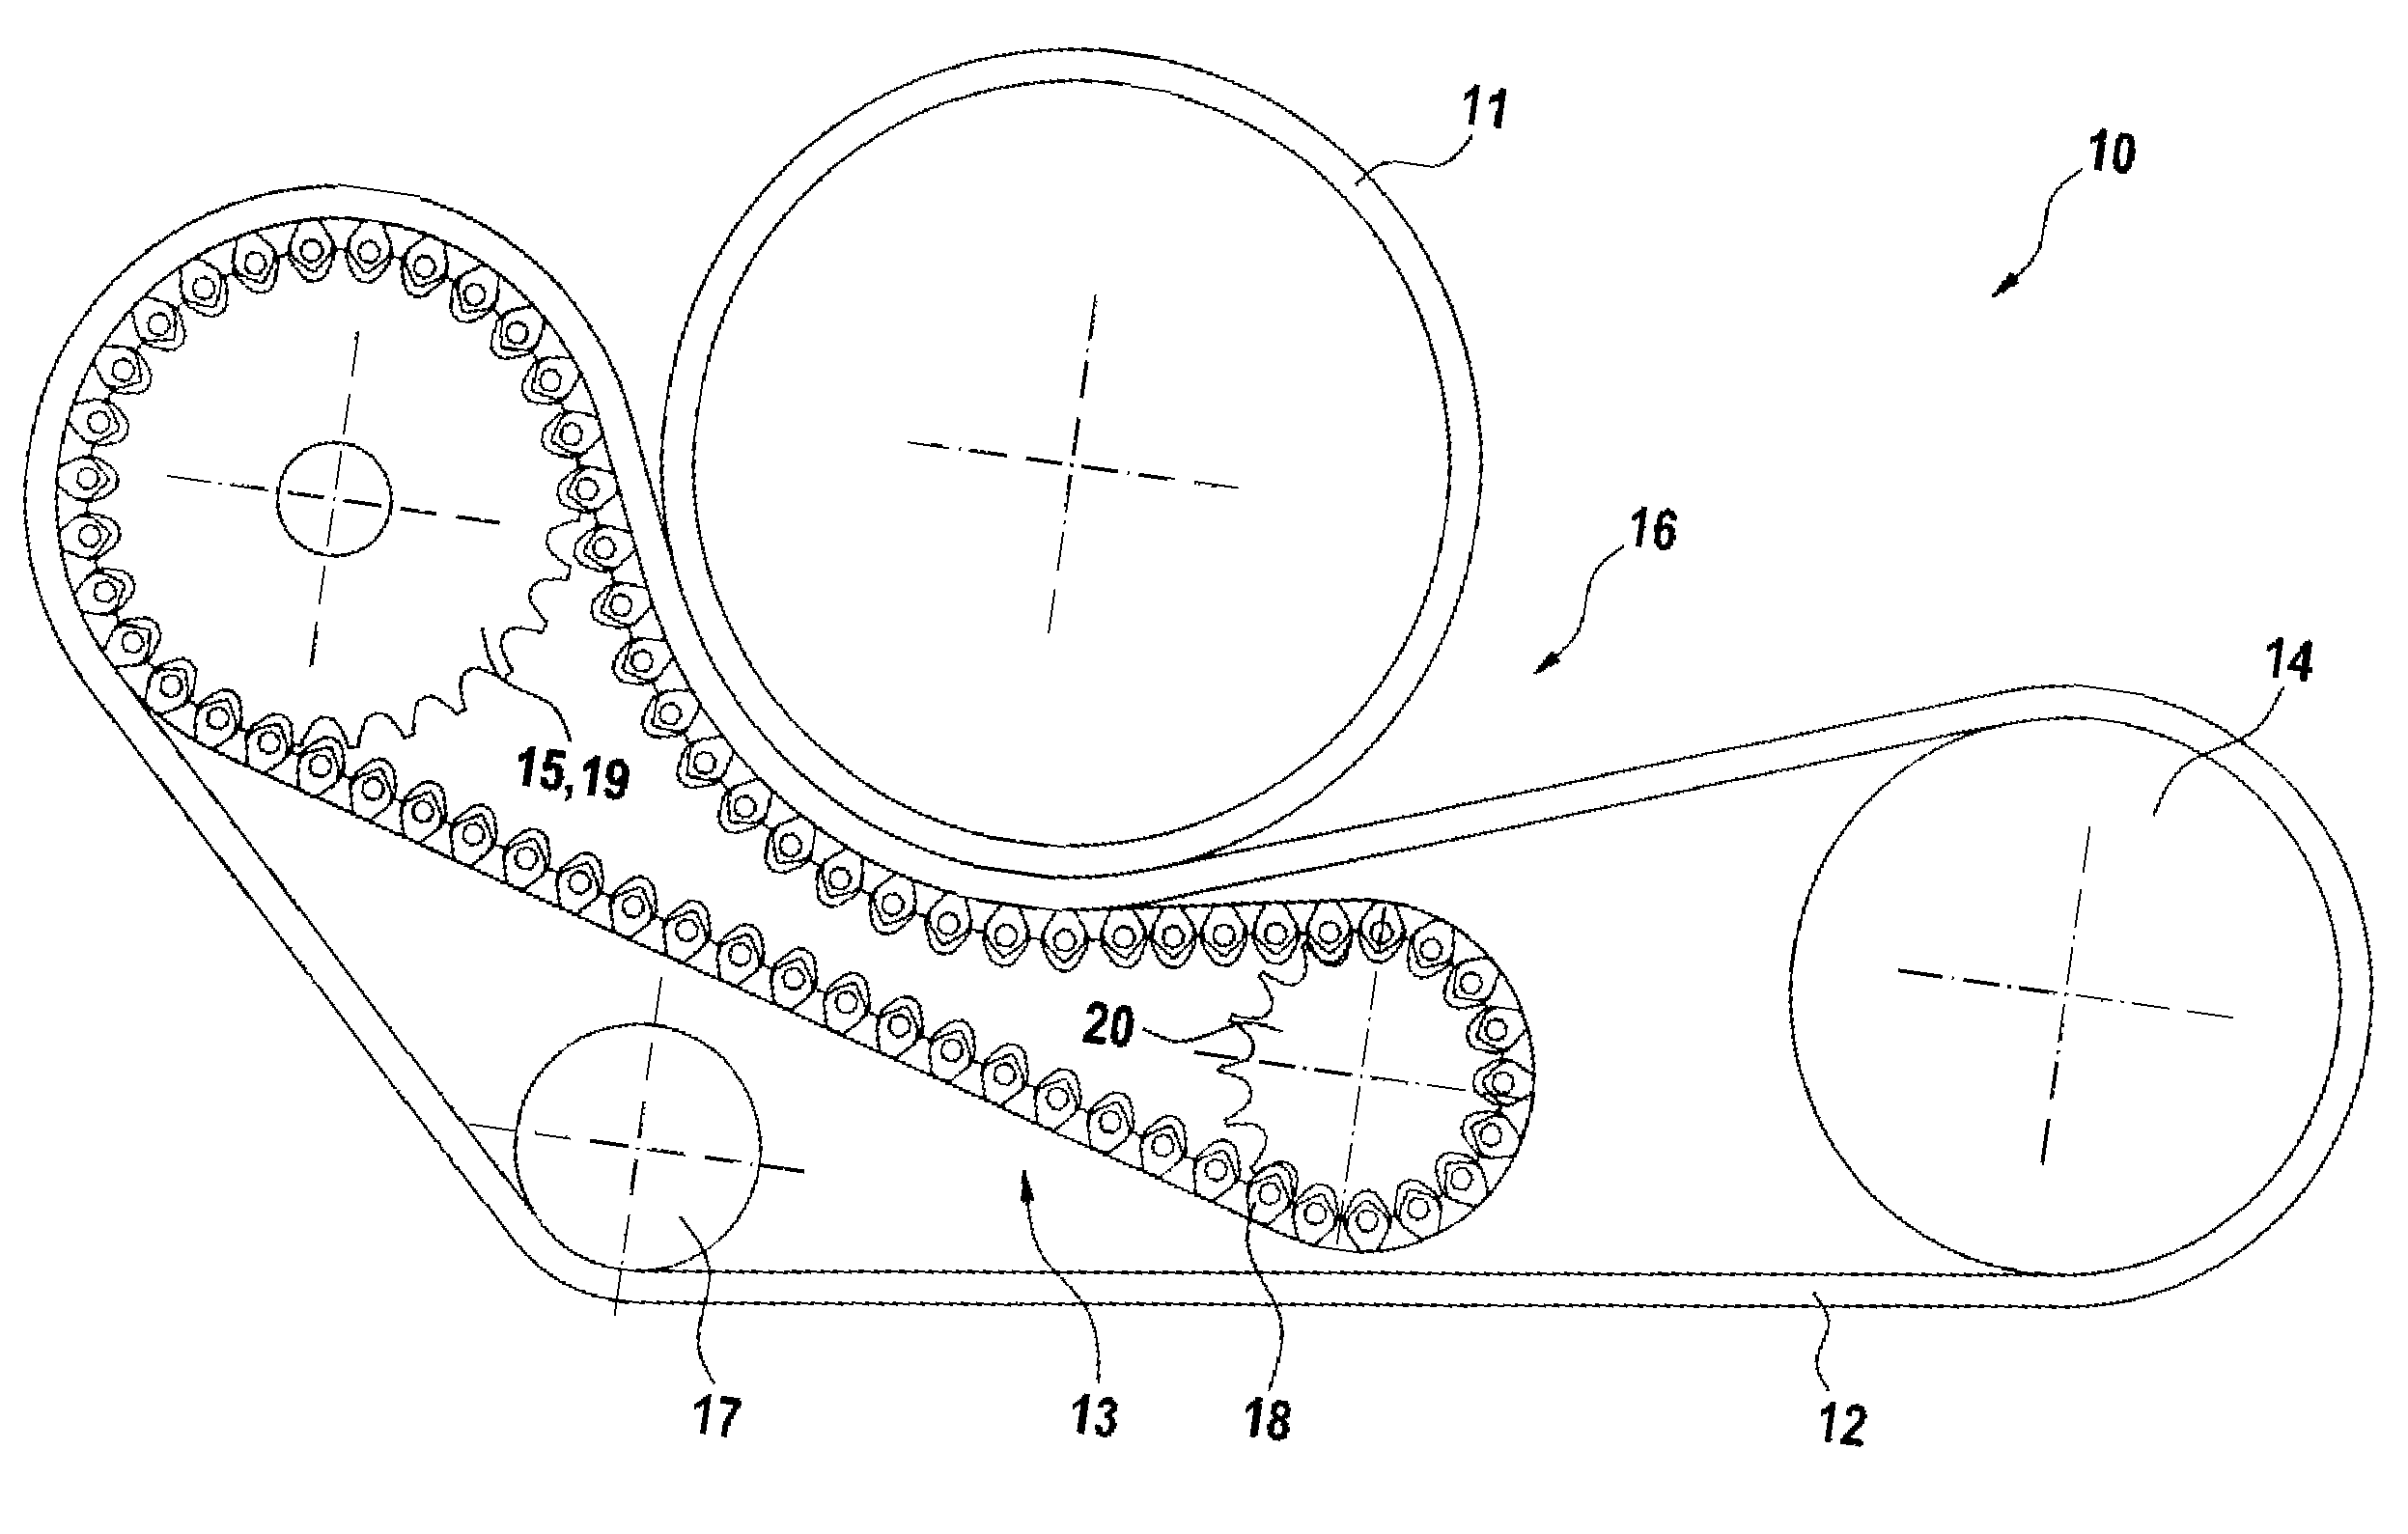 Support Chain with Wear Protection for a Support Device for Separating Substances Having Different Flowabilities